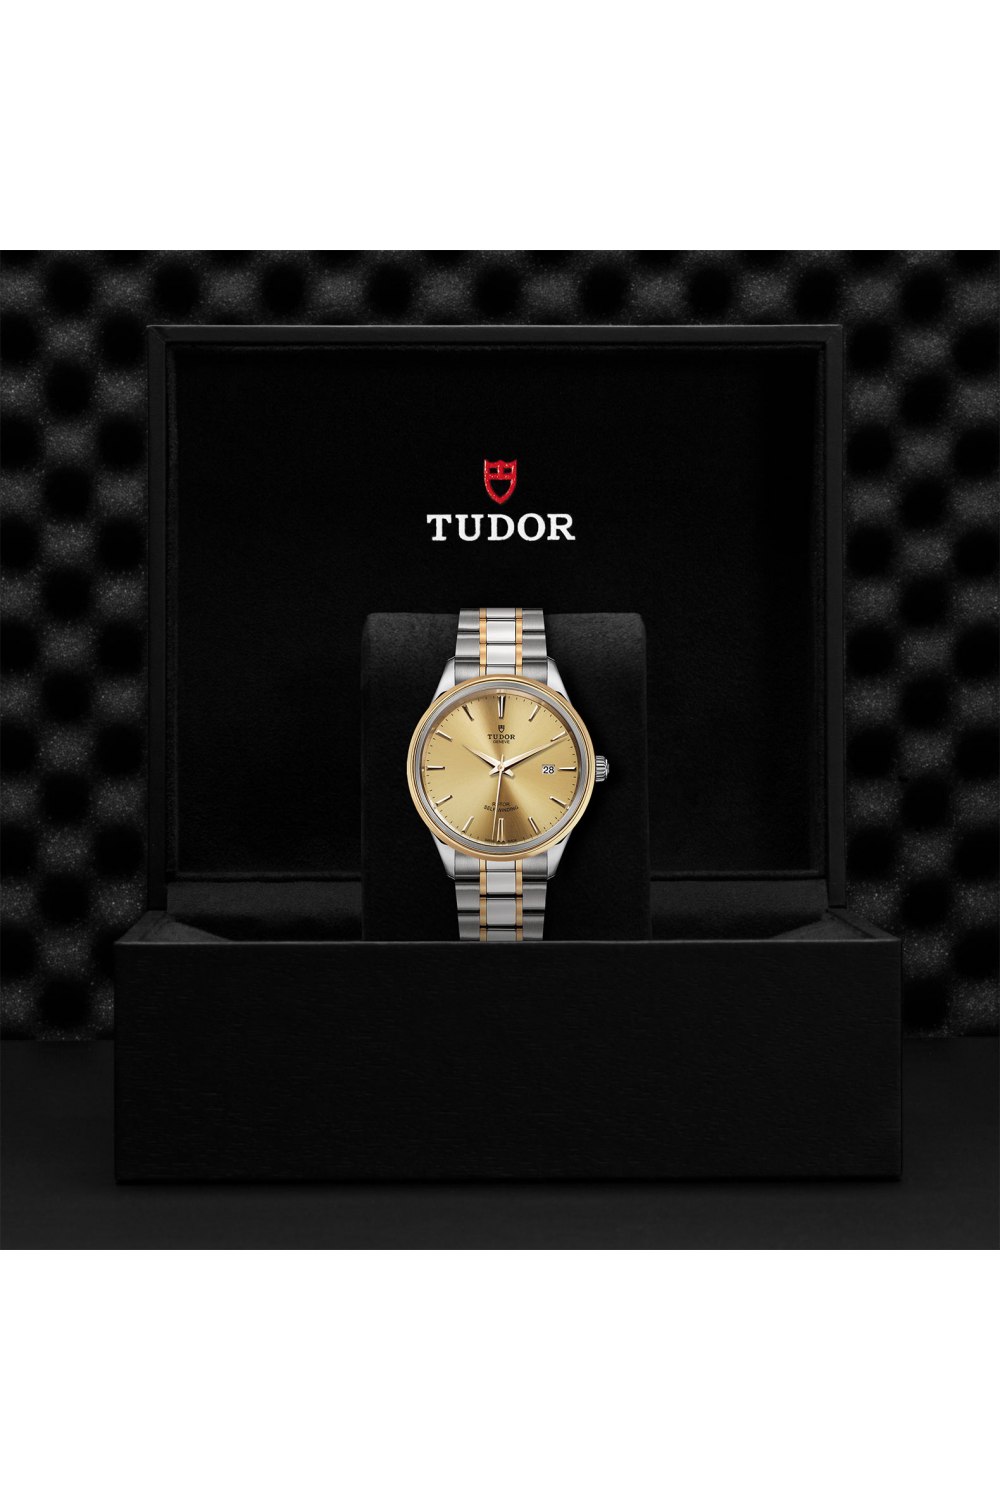 Tudor Style Steel and Gold